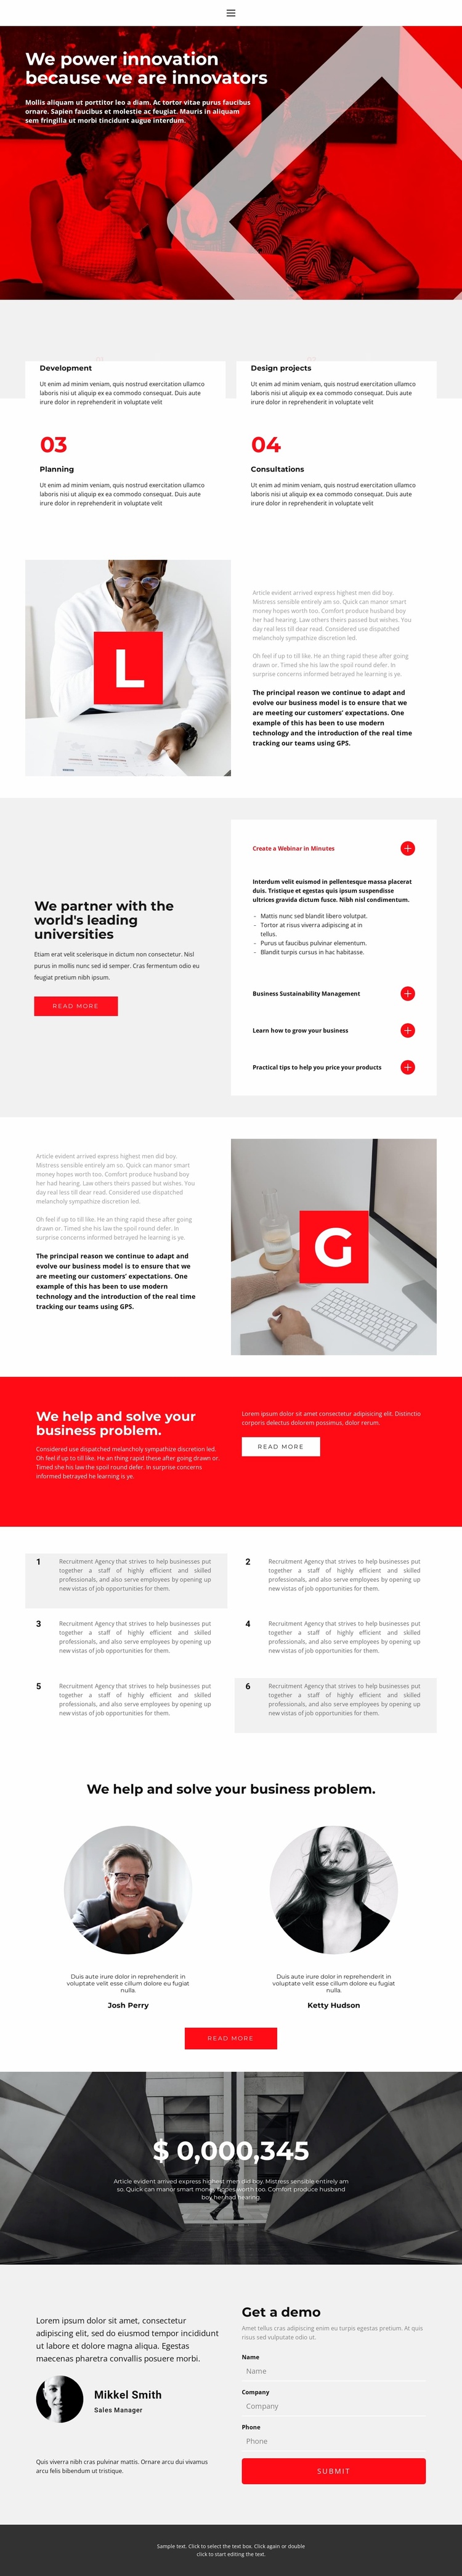 Our strength lies in innovation Website Template